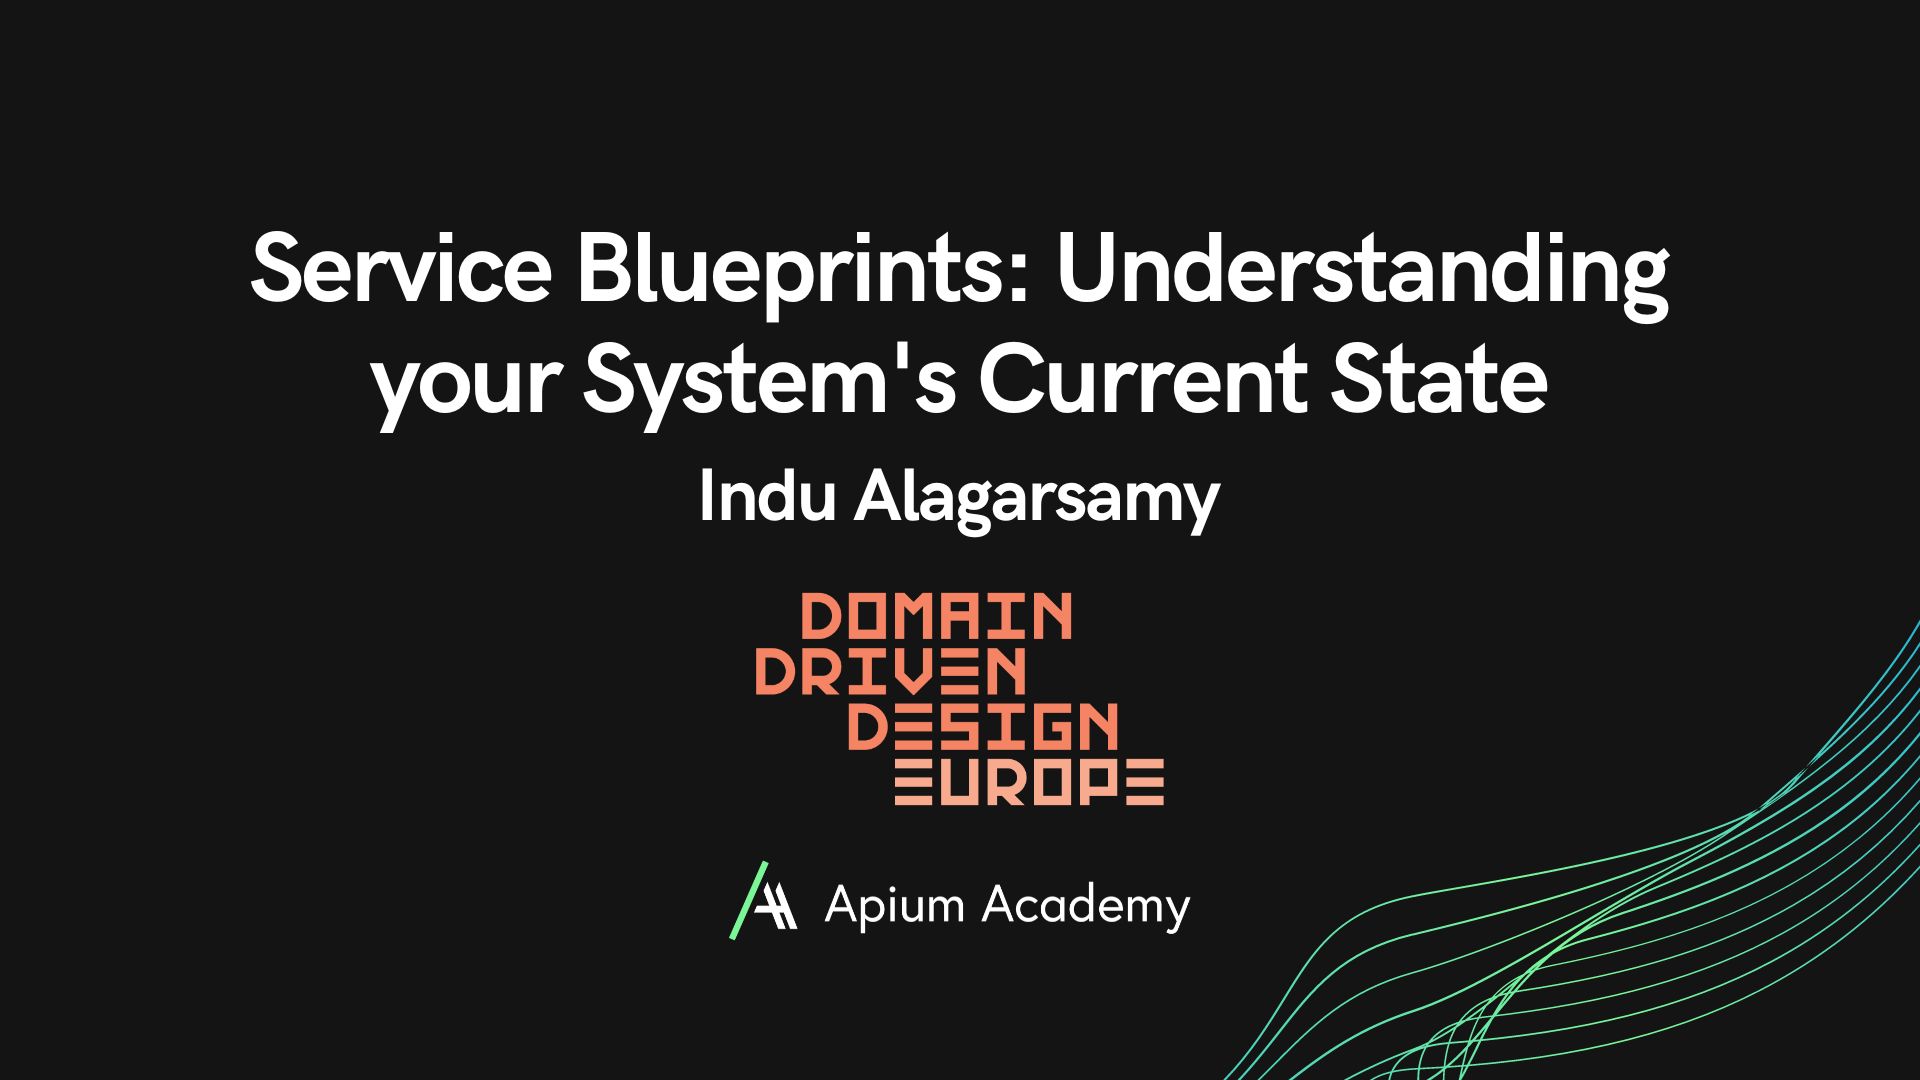 Service Blueprints: Understanding your System’s Current State